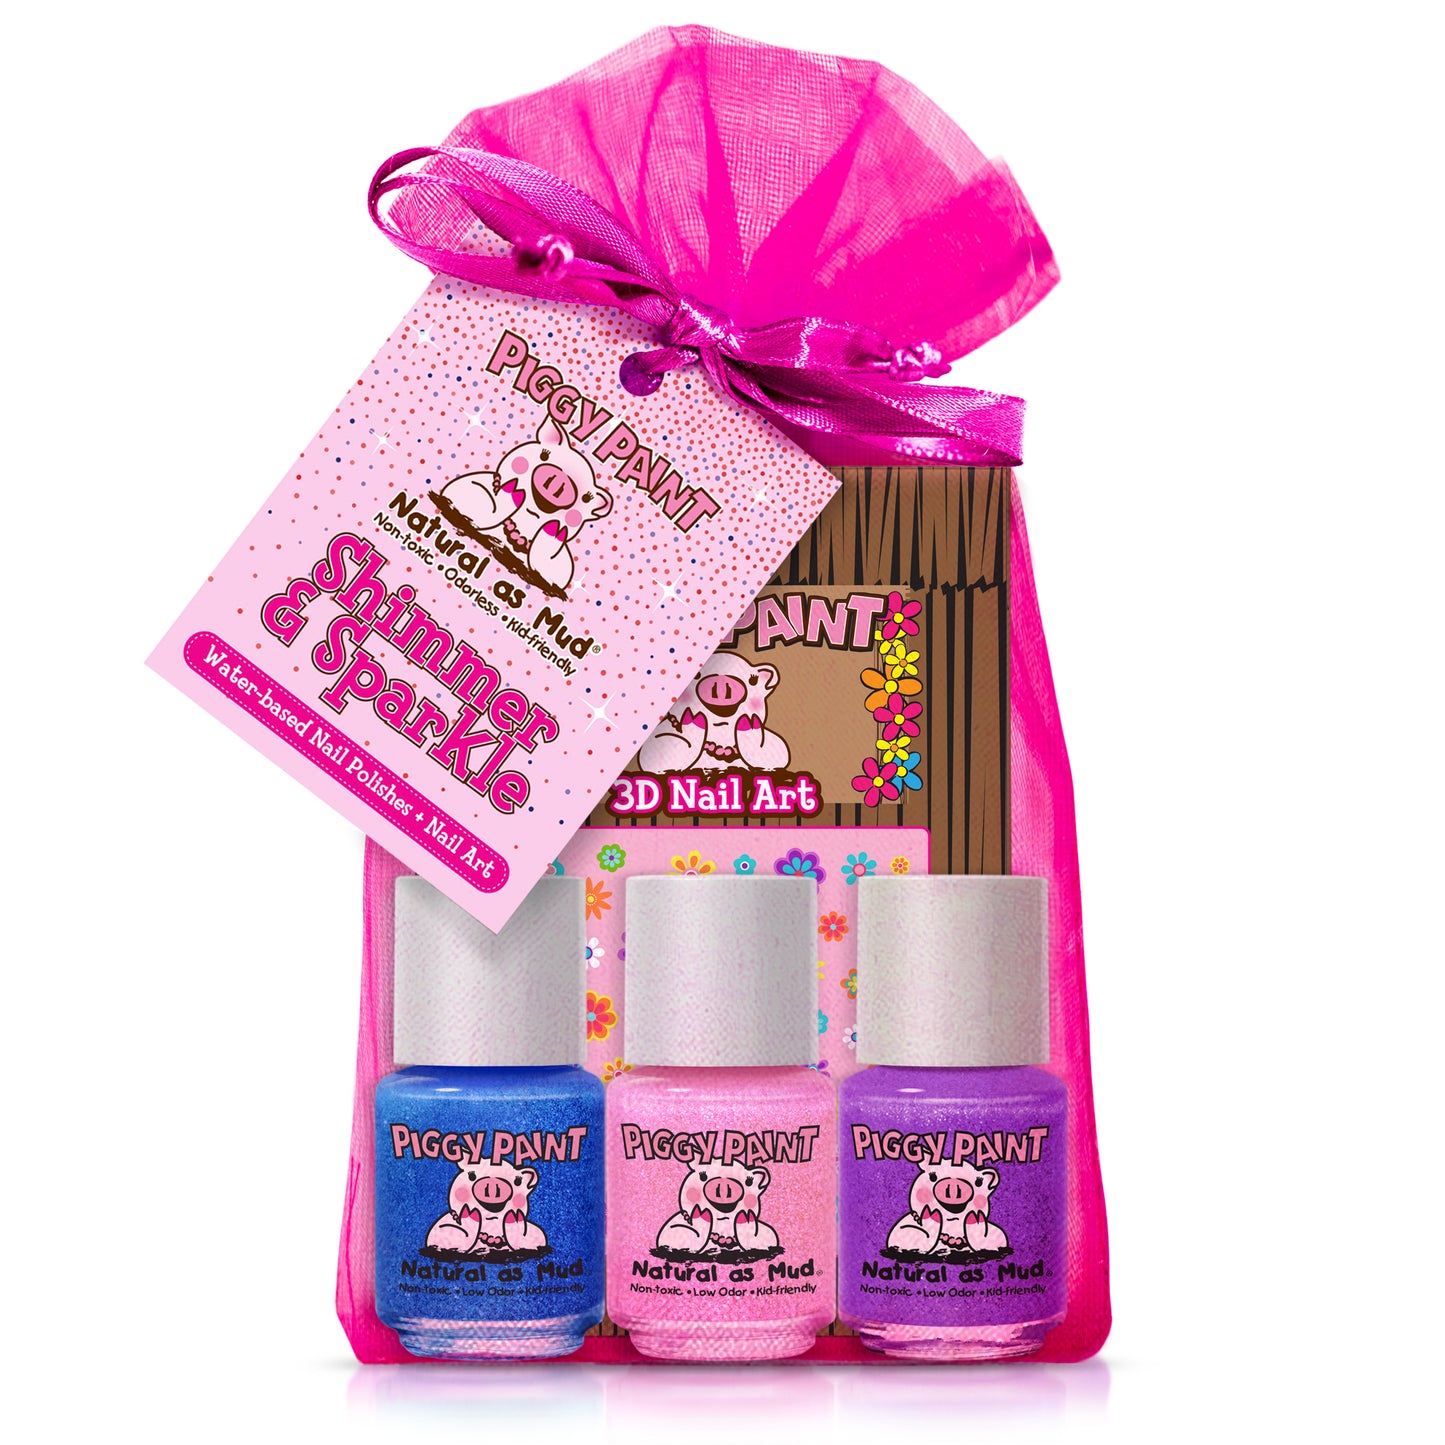 O.P.I. x Barbie Nail Polish Collection In Store Photographs – The Estella  Initiative